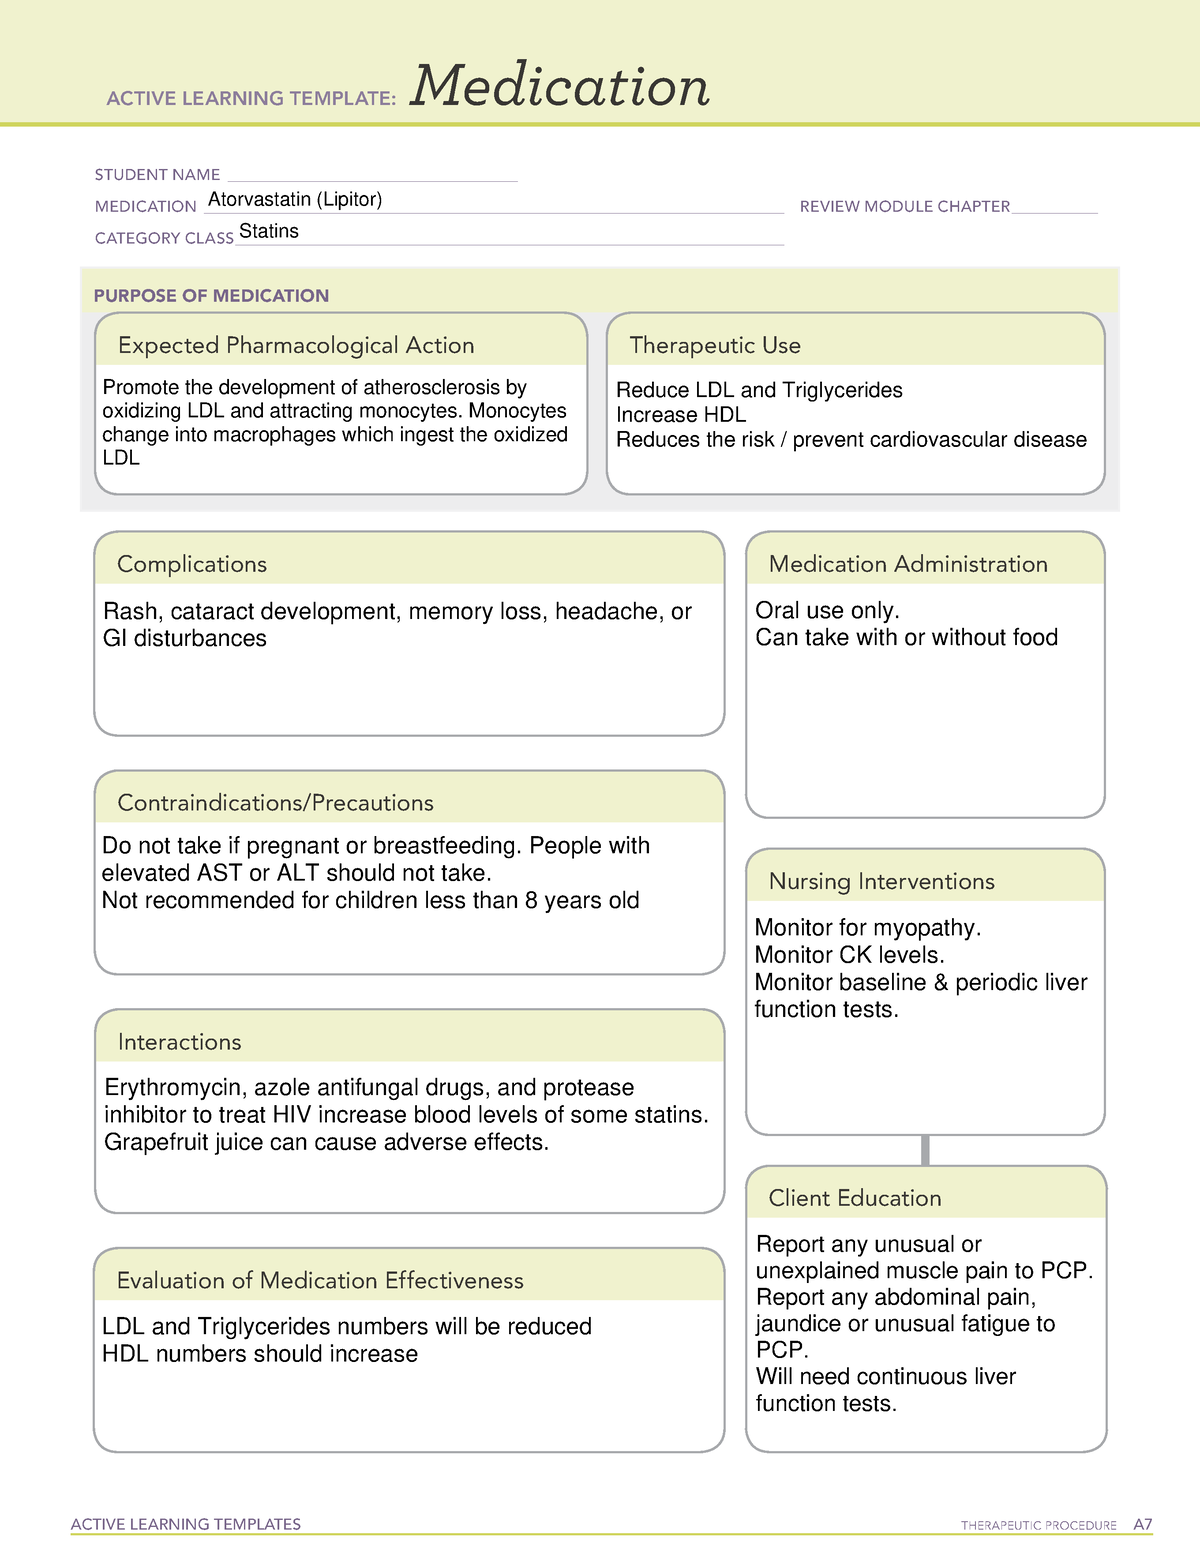 ATI Atrovastatin Lipitor Med Sheet ACTIVE LEARNING TEMPLATES THERAPEUTIC PROCEDURE A